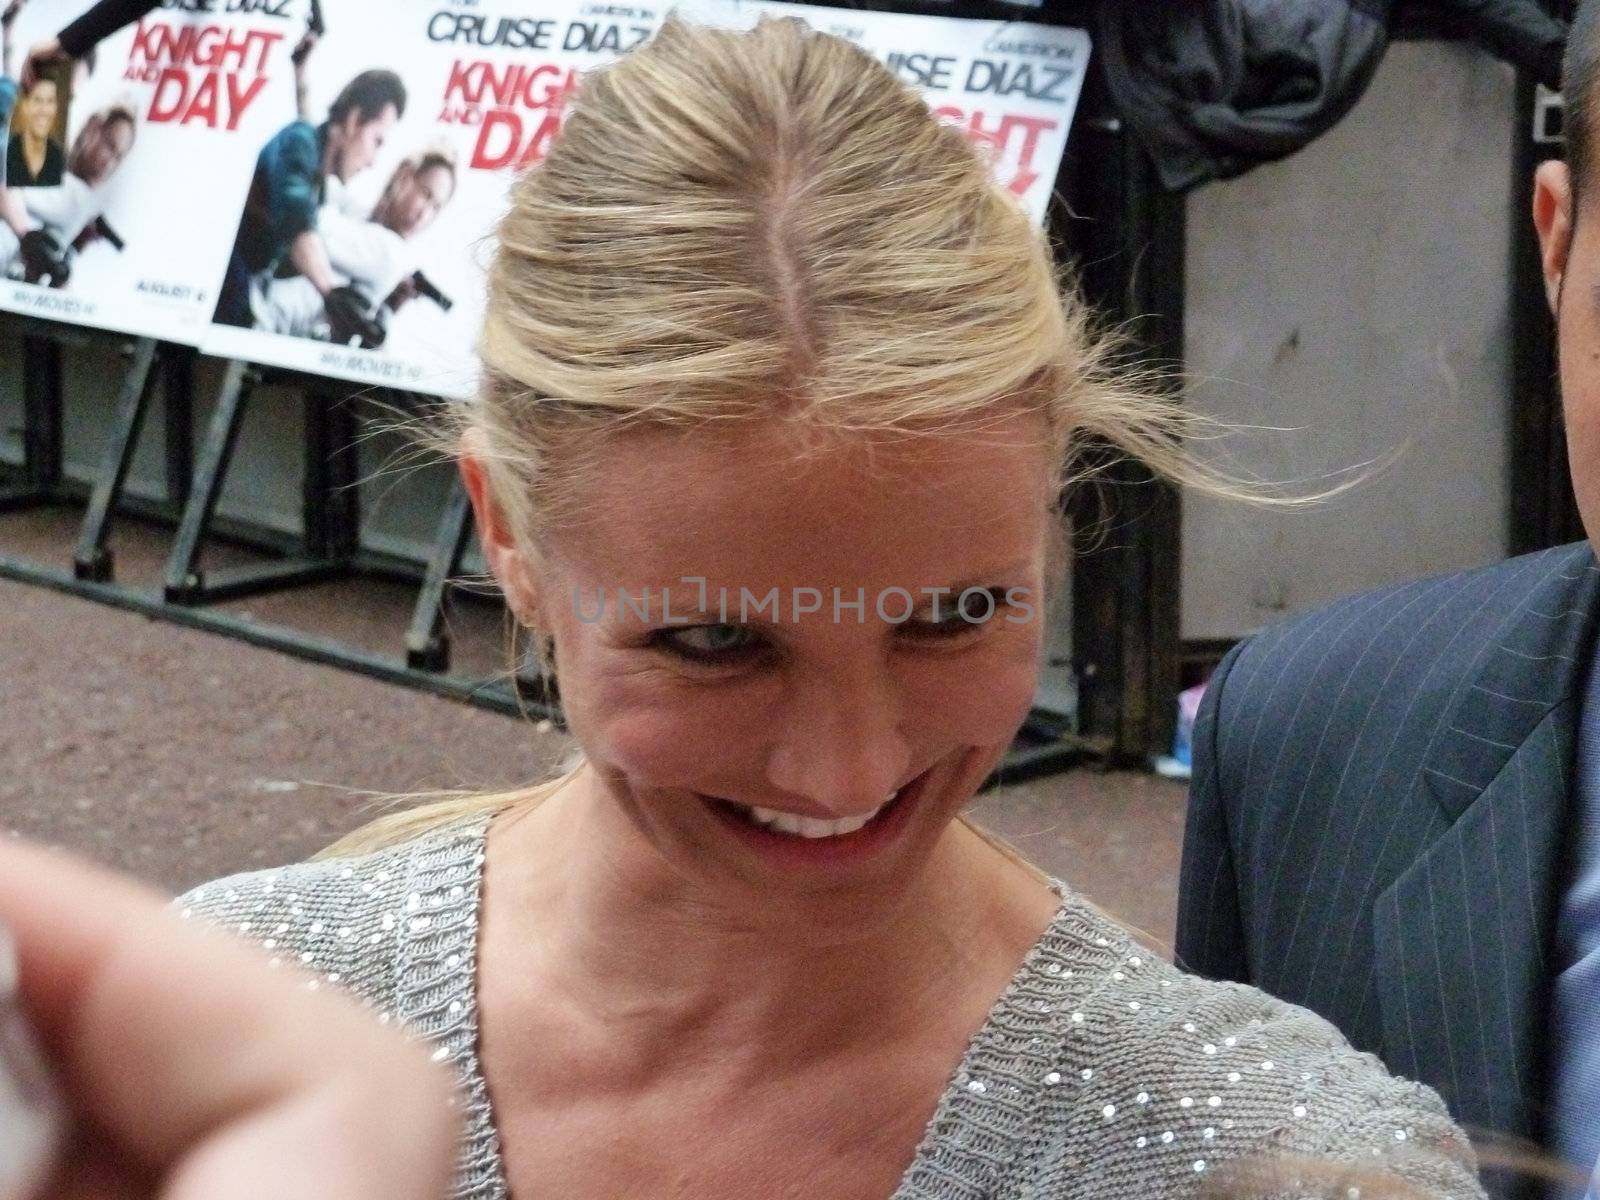 Cameron Diaz At Knight And Day Premiere In Central London 22nd July 2010 by harveysart